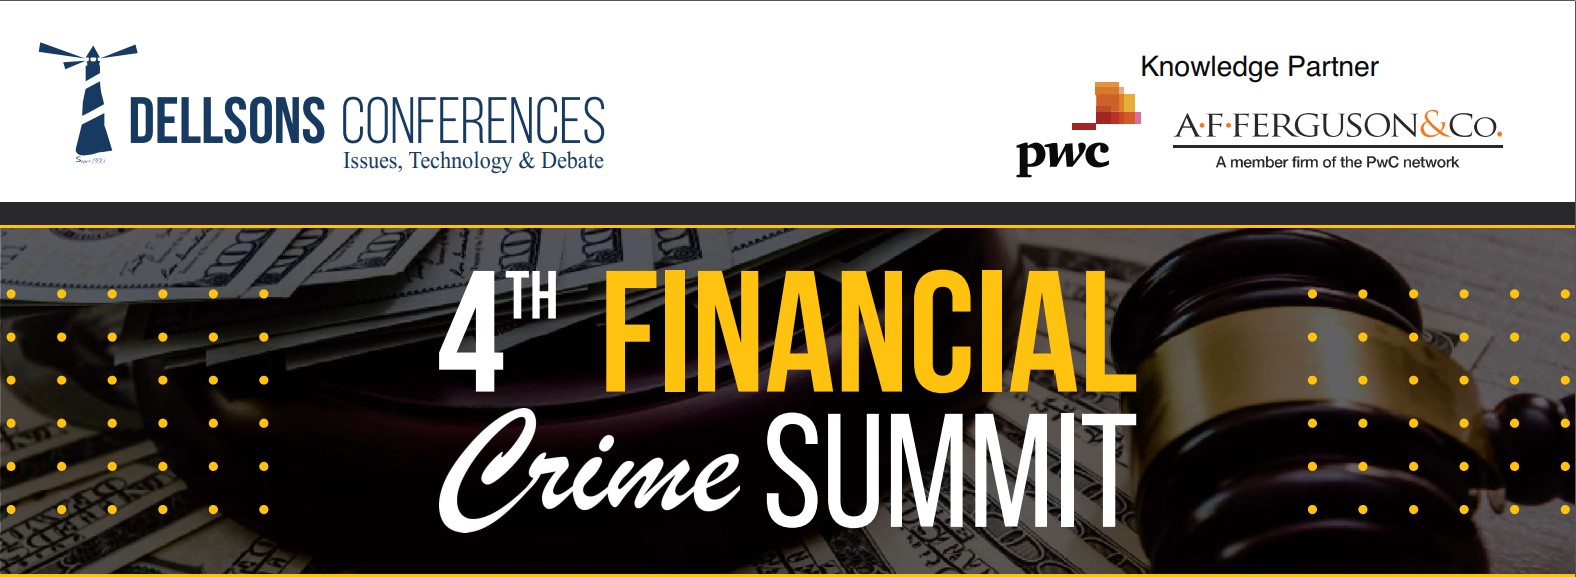 4TH Financial Crime Summit Highlights Critical Challenges & Proposes Solutions